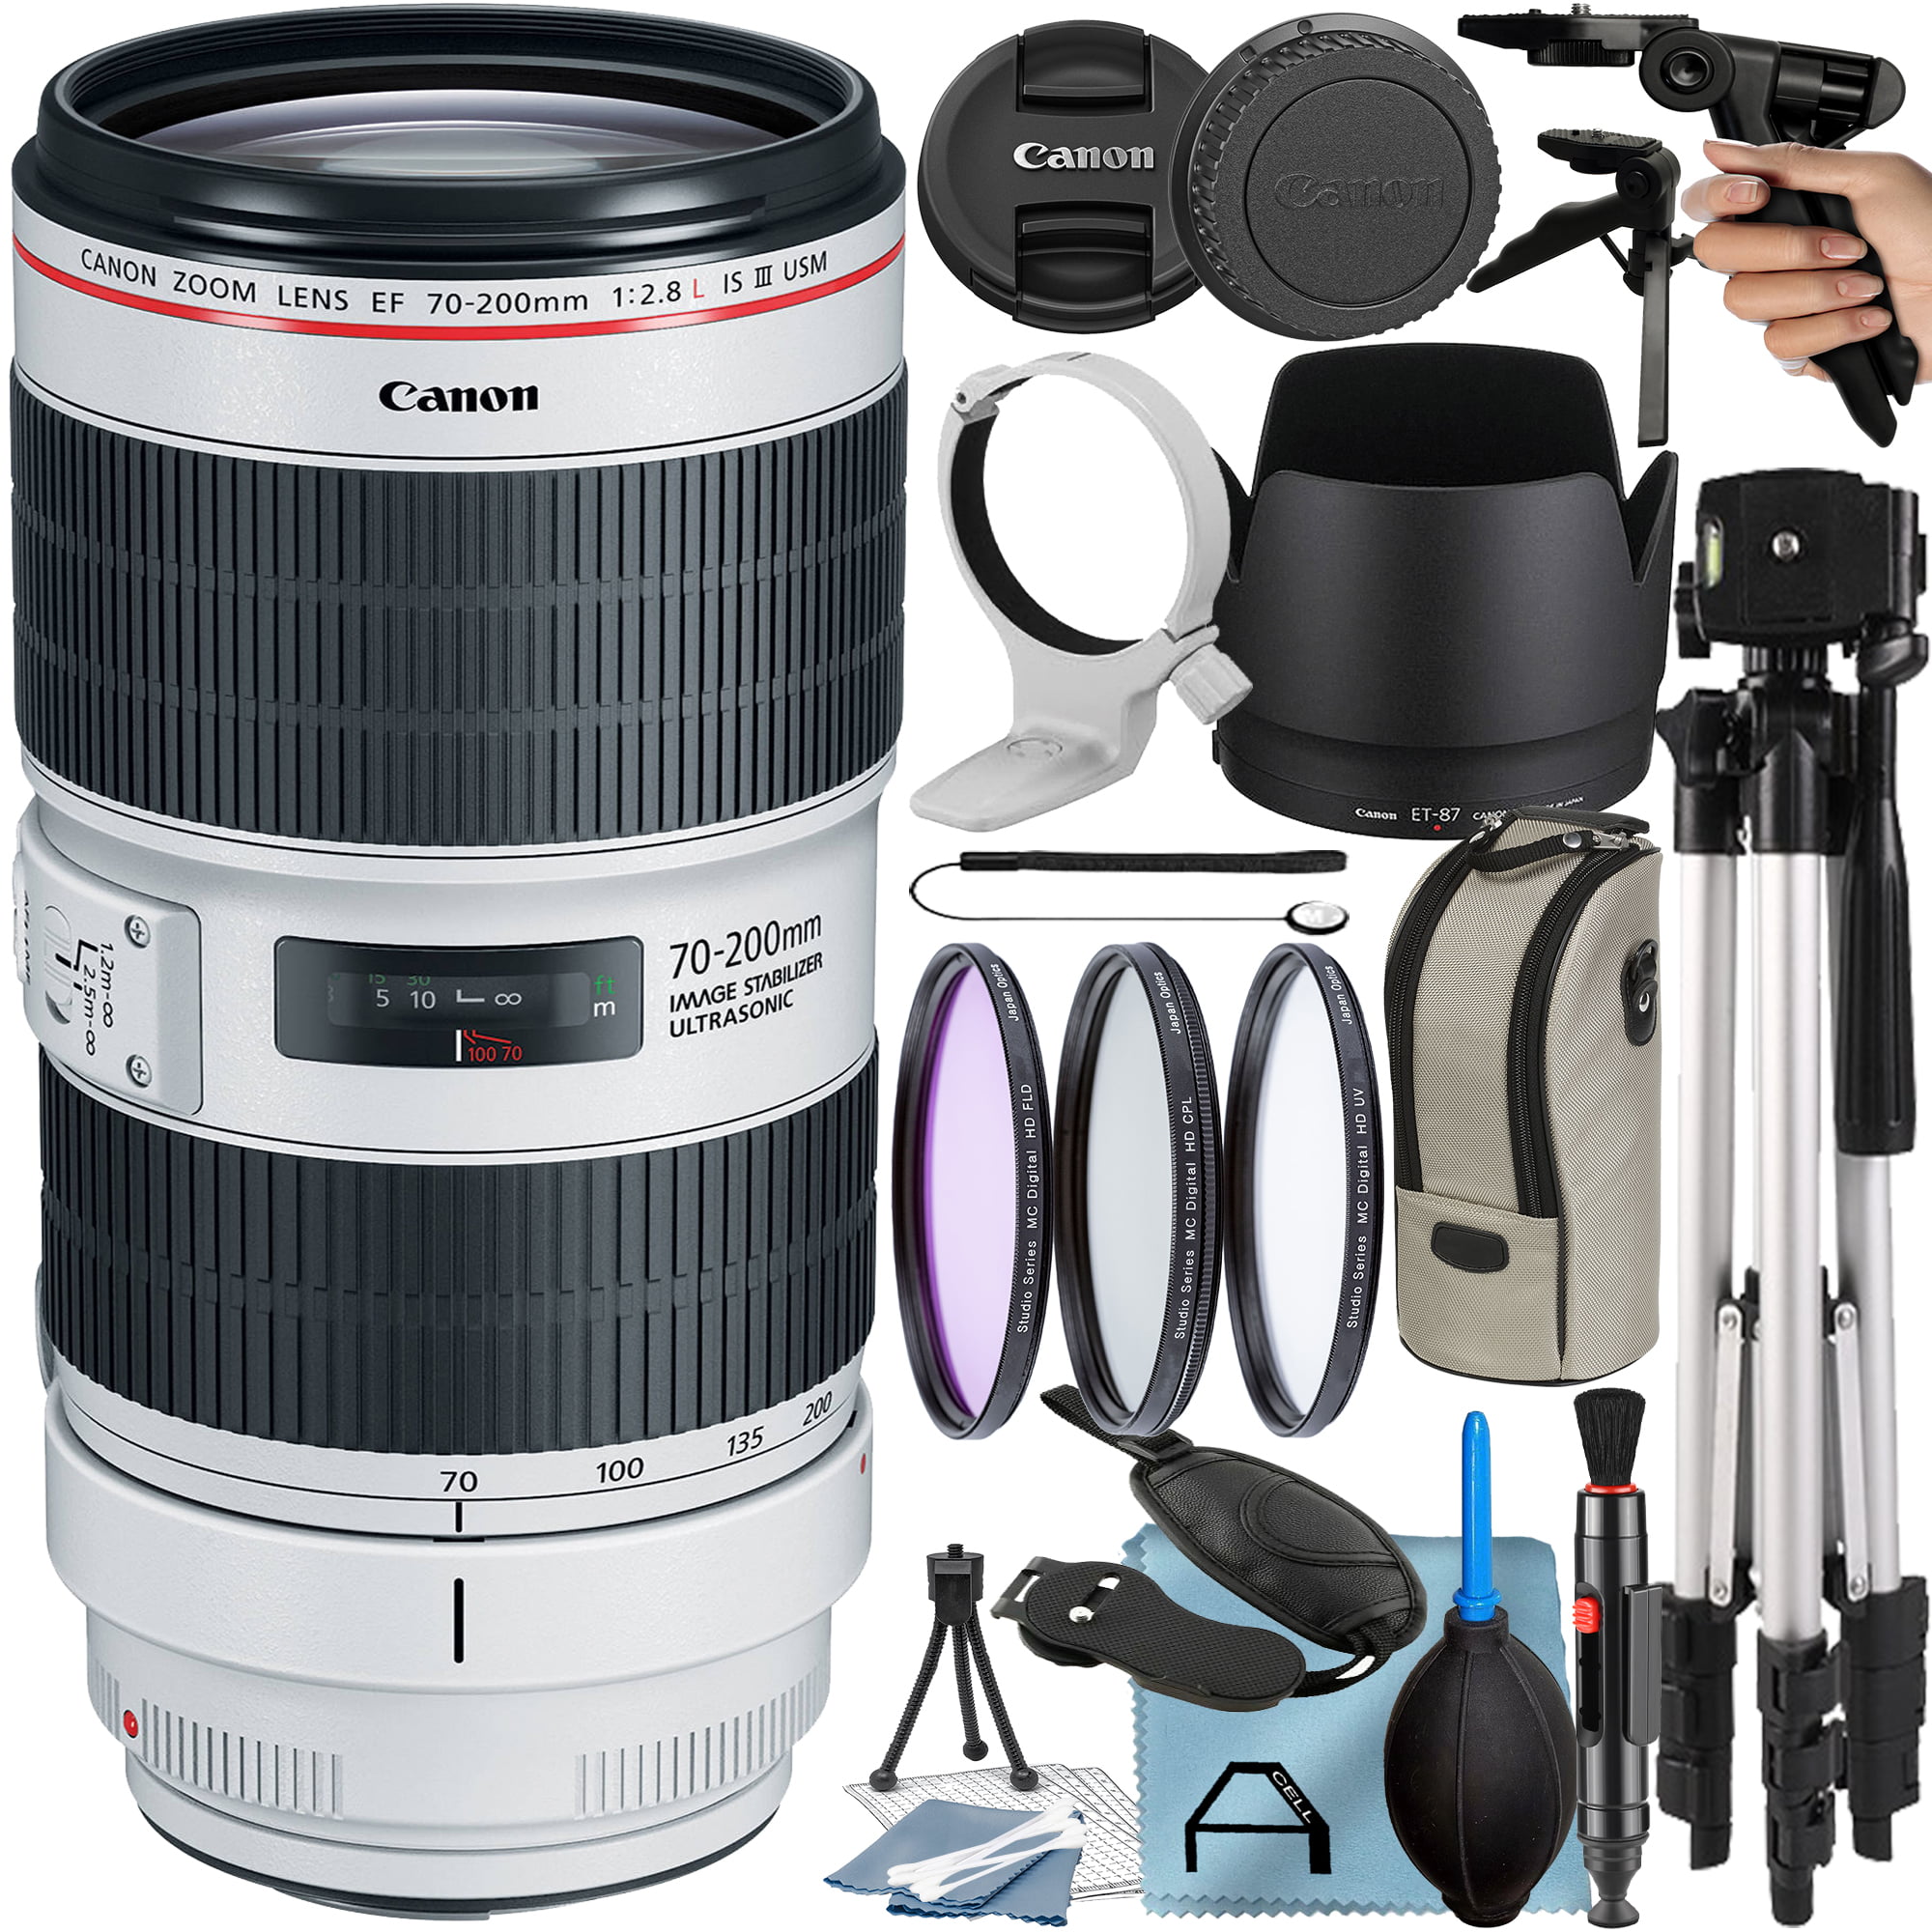 Canon EF 70-200mm f/2.8L IS III USM Lens with Tripod + 3 Pieces Filter + A-Cell Accessory Bundle